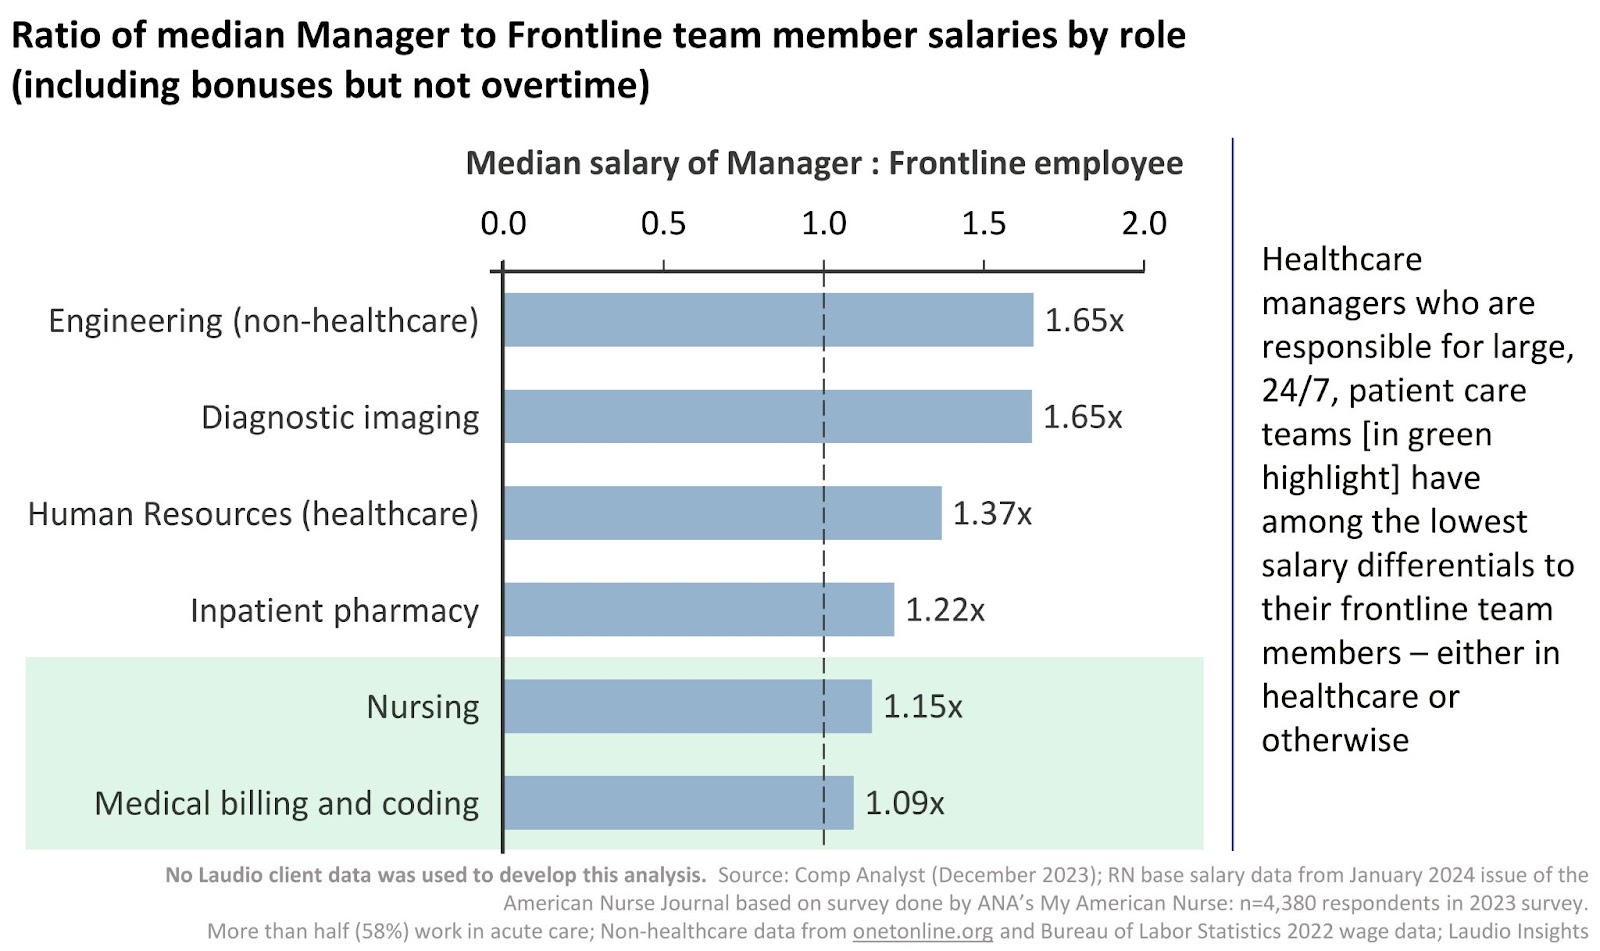 Laudio Insights: Ratio of median manager to frontline team member salaries by role